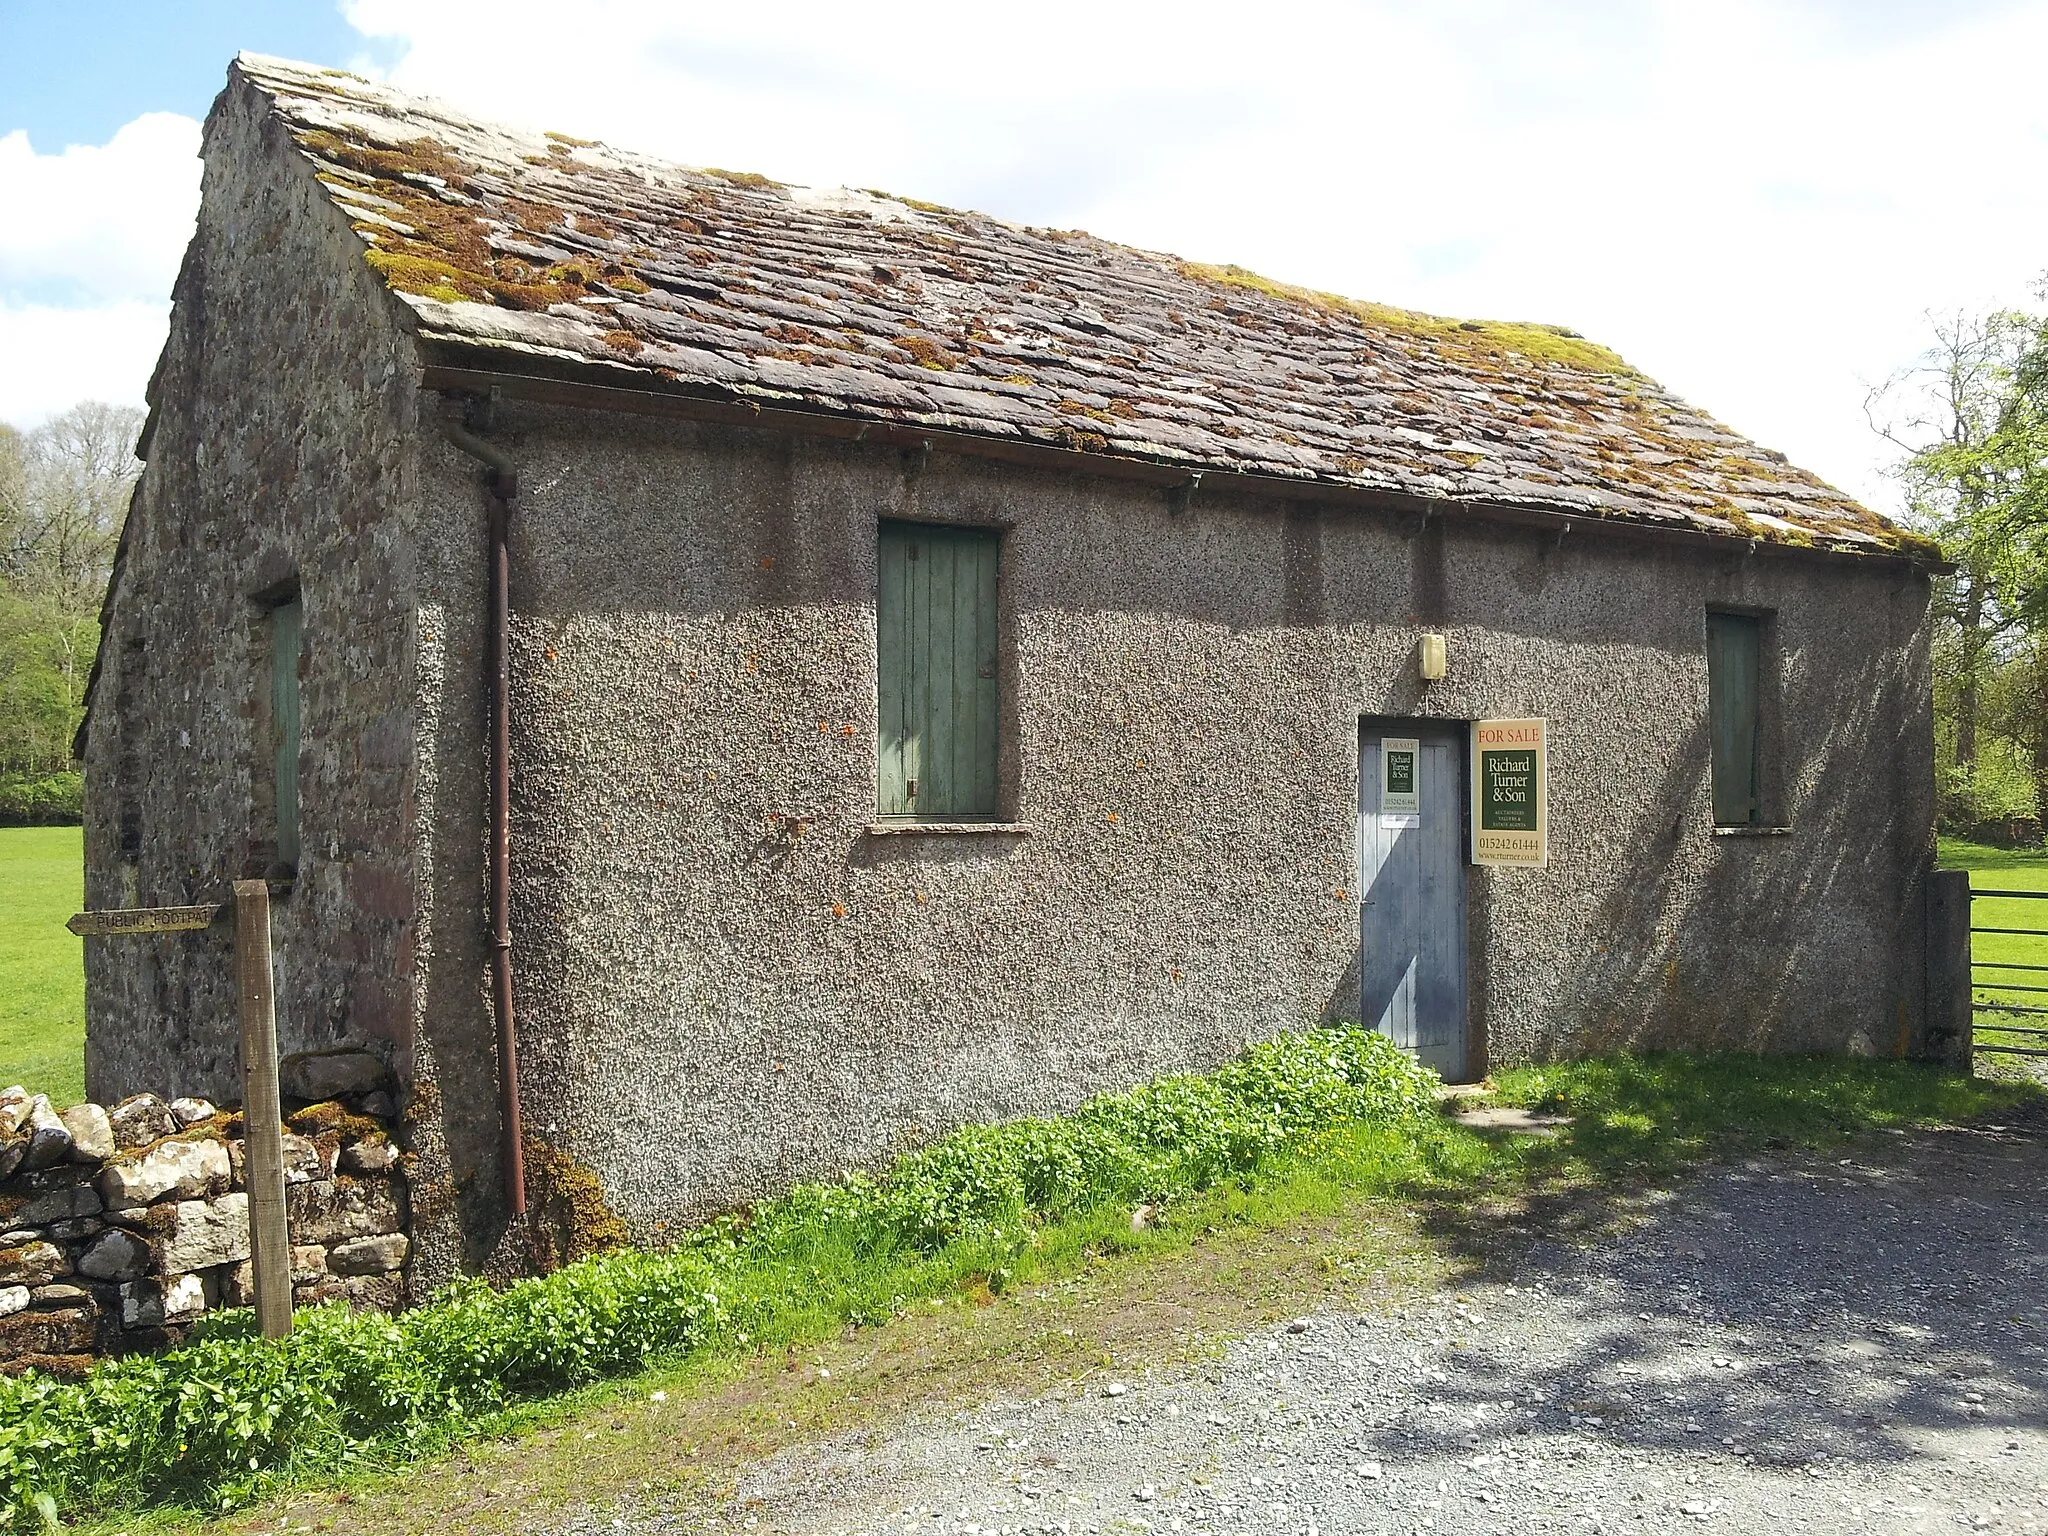 Photo showing: The Old Temperance Hall in Keasden, North Yorkshire prior to restoration into a Camping Barn.